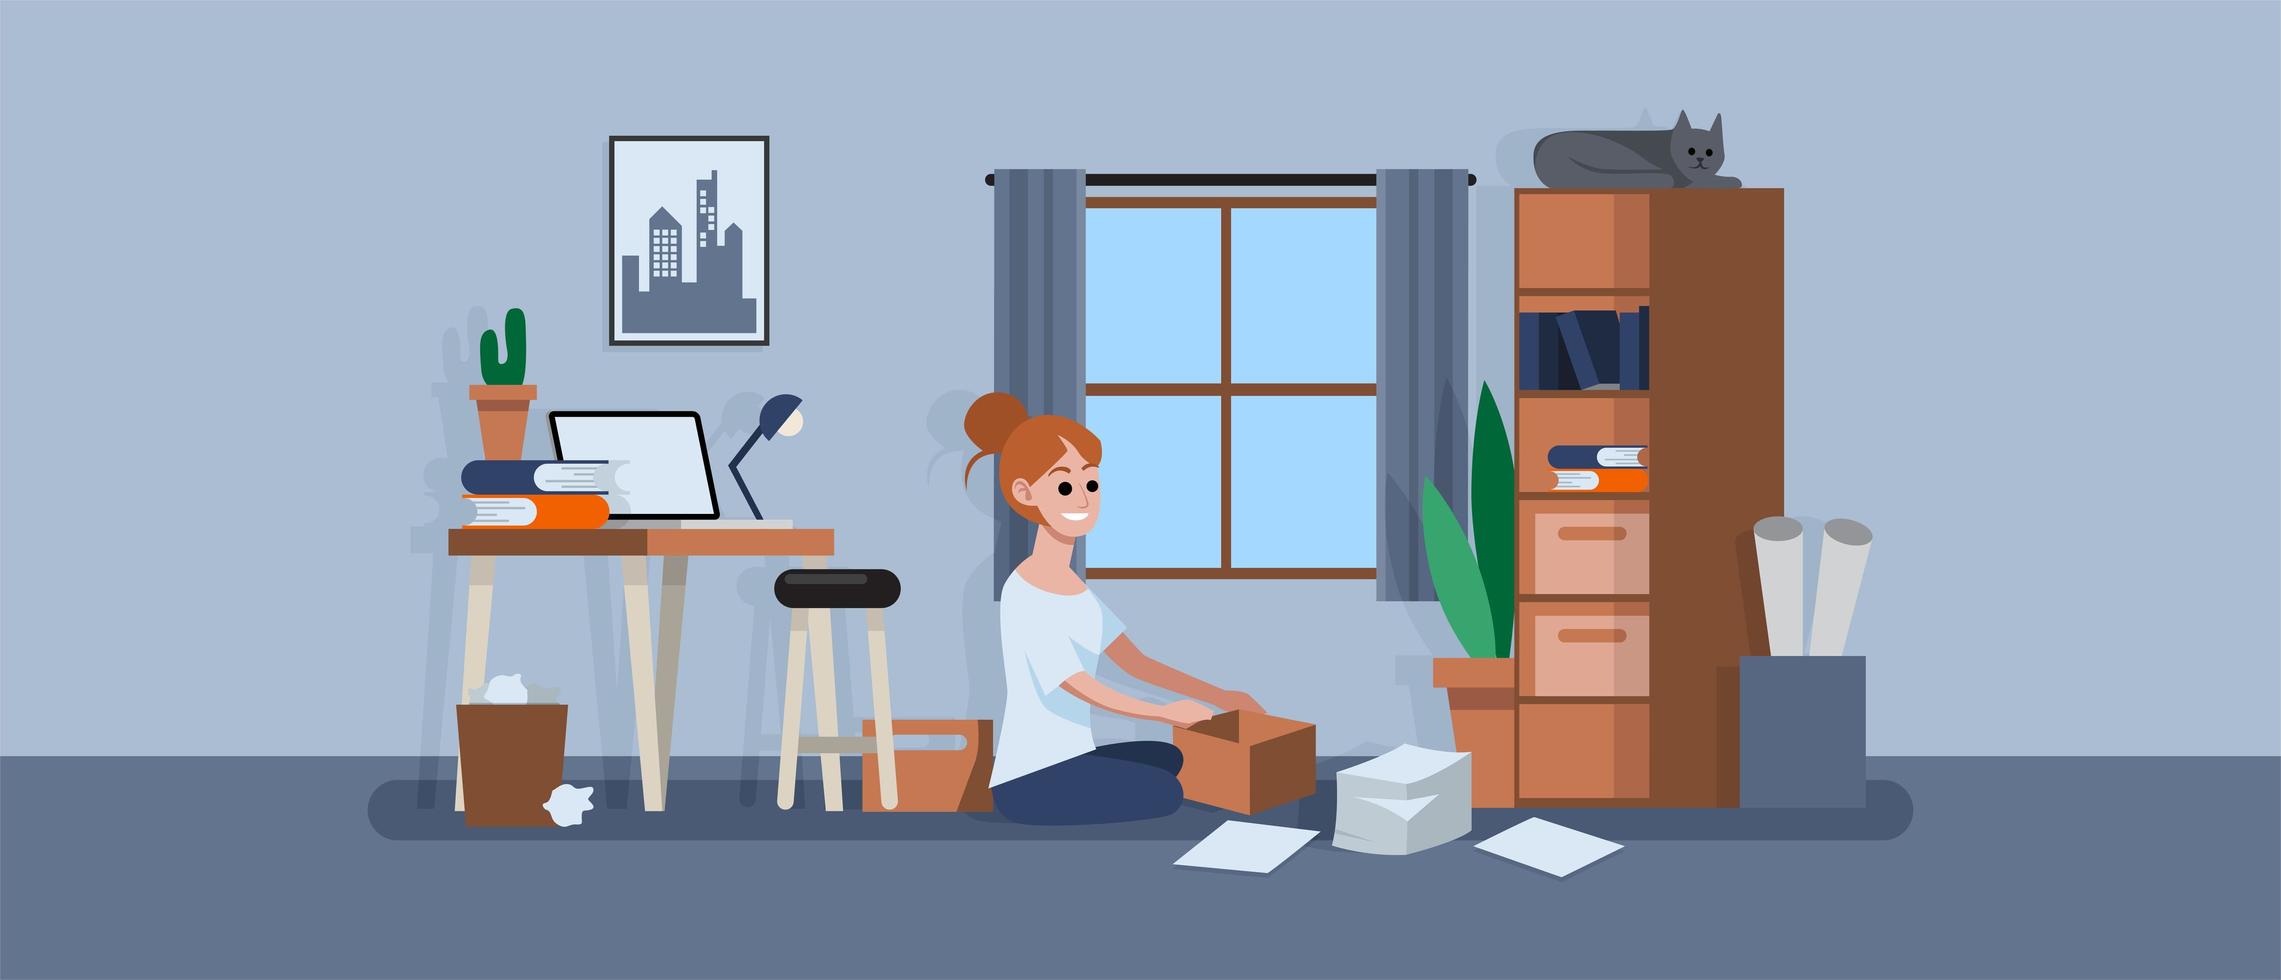 https://static.vecteezy.com/system/resources/previews/001/226/240/non_2x/woman-sitting-on-floor-and-cleaning-workspace-vector.jpg